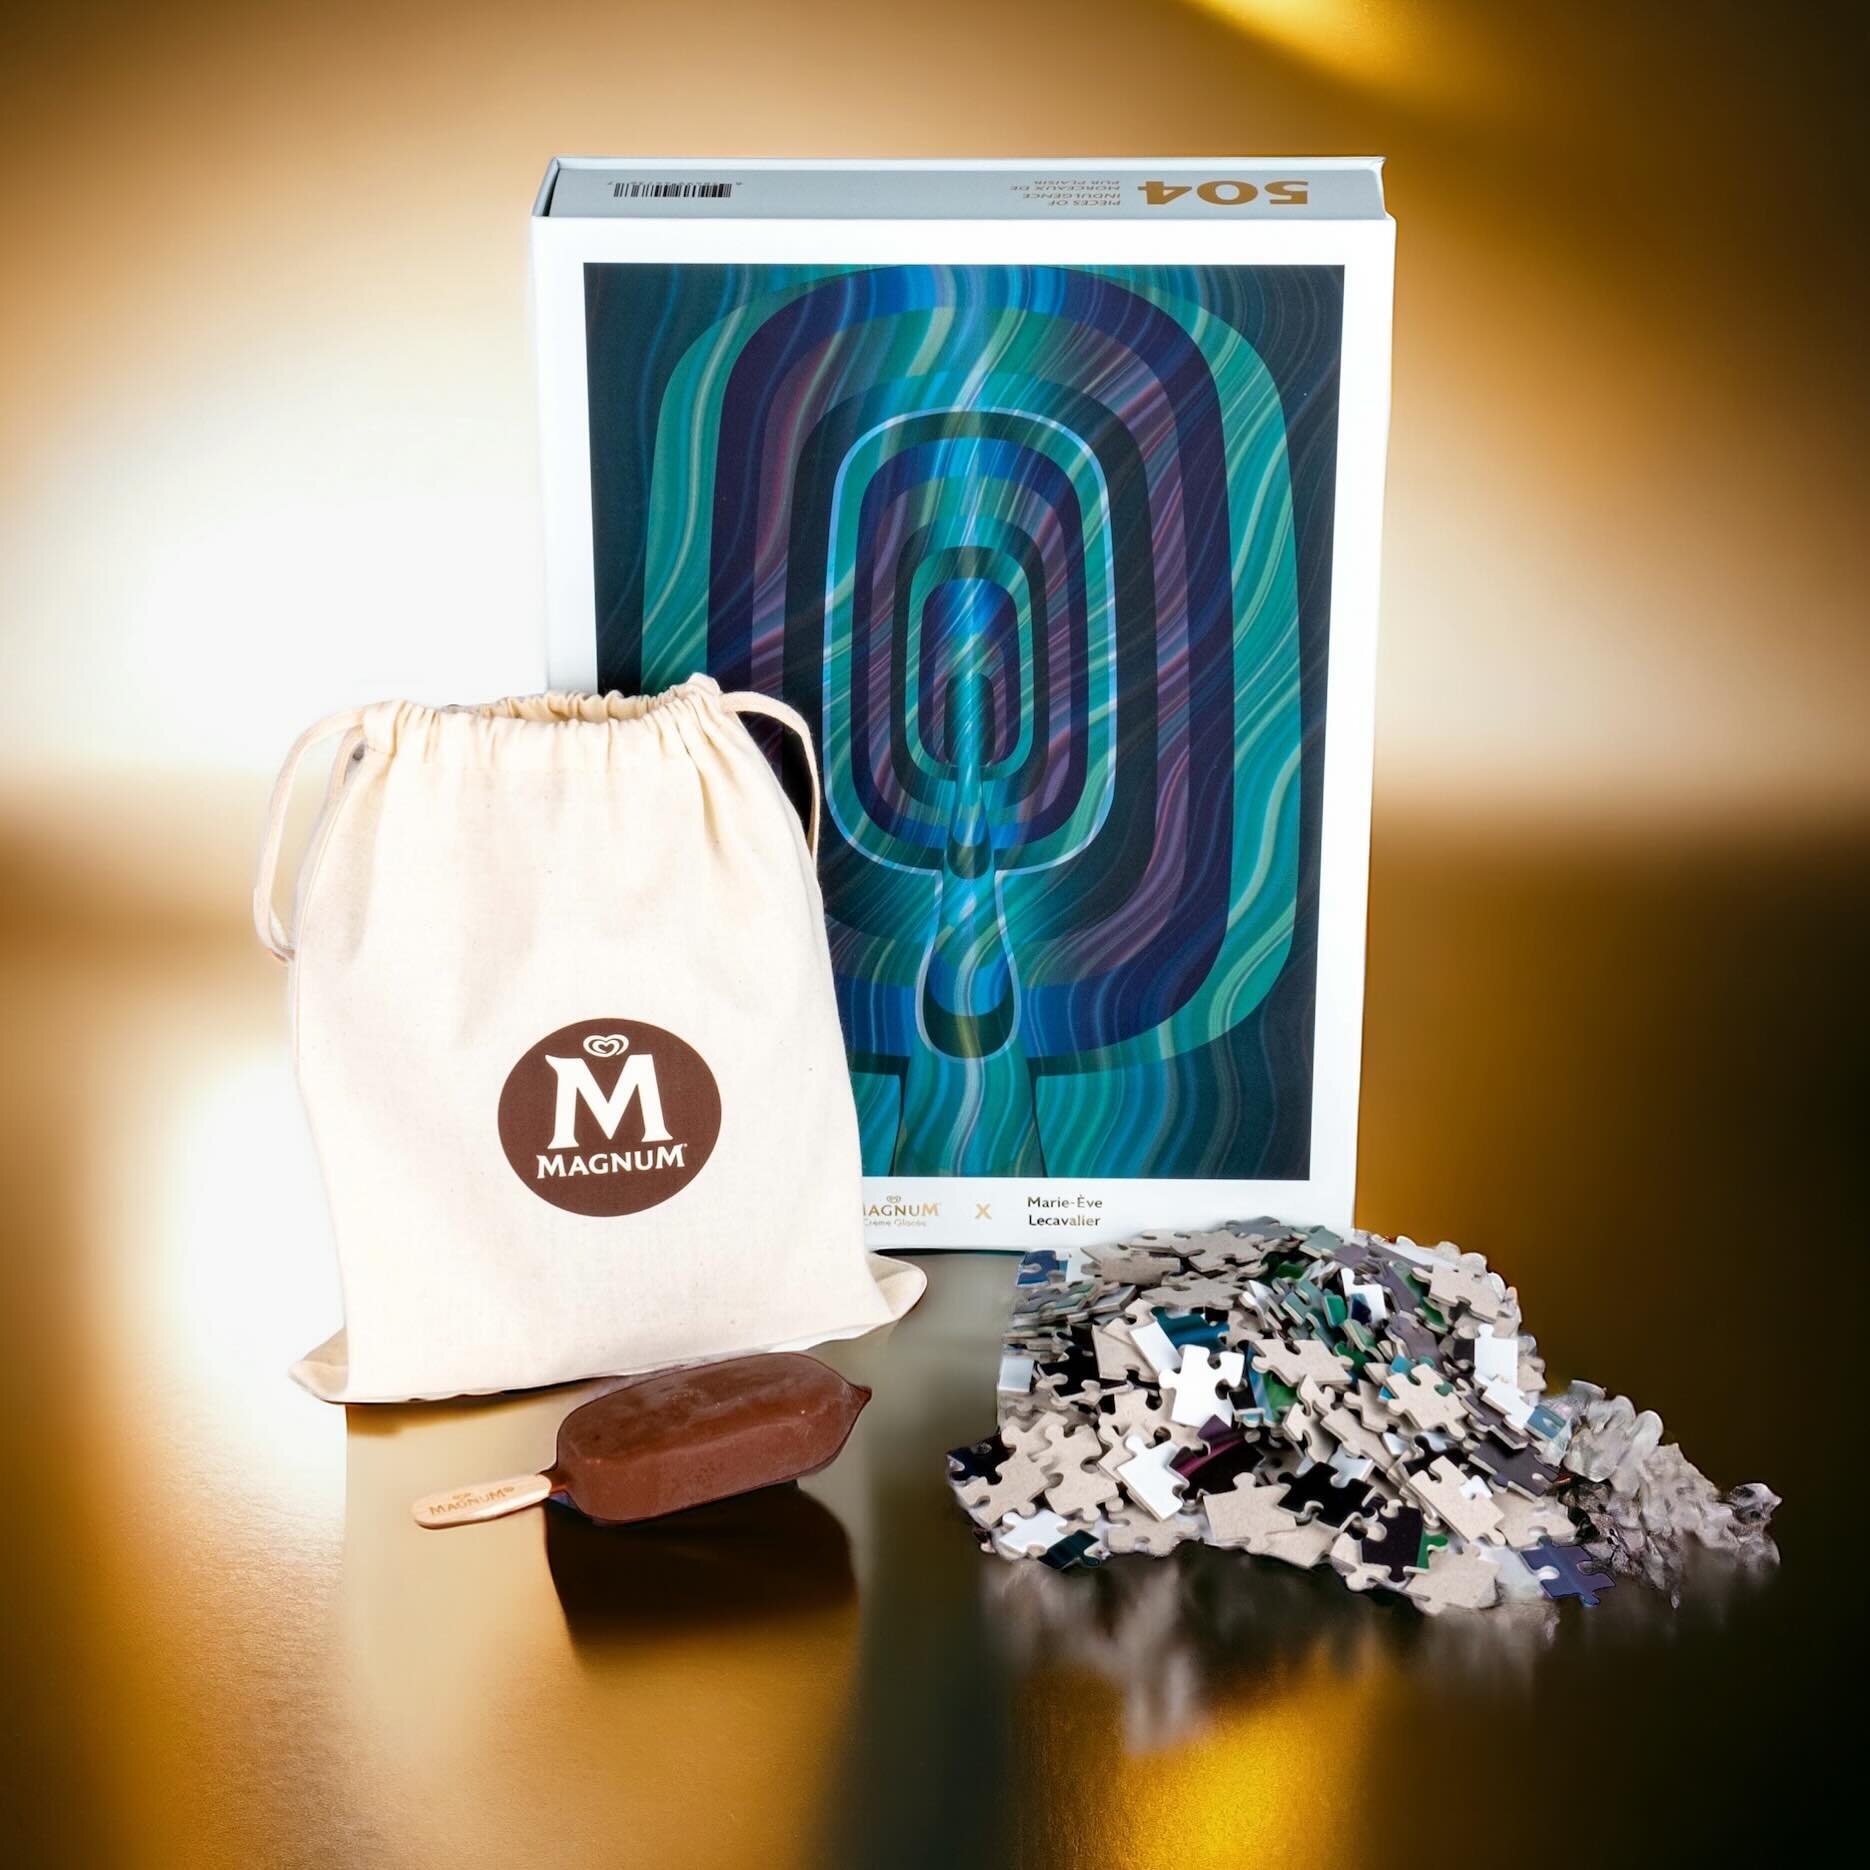 Throwing it back to this exquisite bespoke box and puzzle we crafted for @magnum. 🎁✨ Experience the luxury and innovation firsthand with this stunning collaboration.

#magnummoments #magnum #bespoke #custombox #custompuzzle #toronto